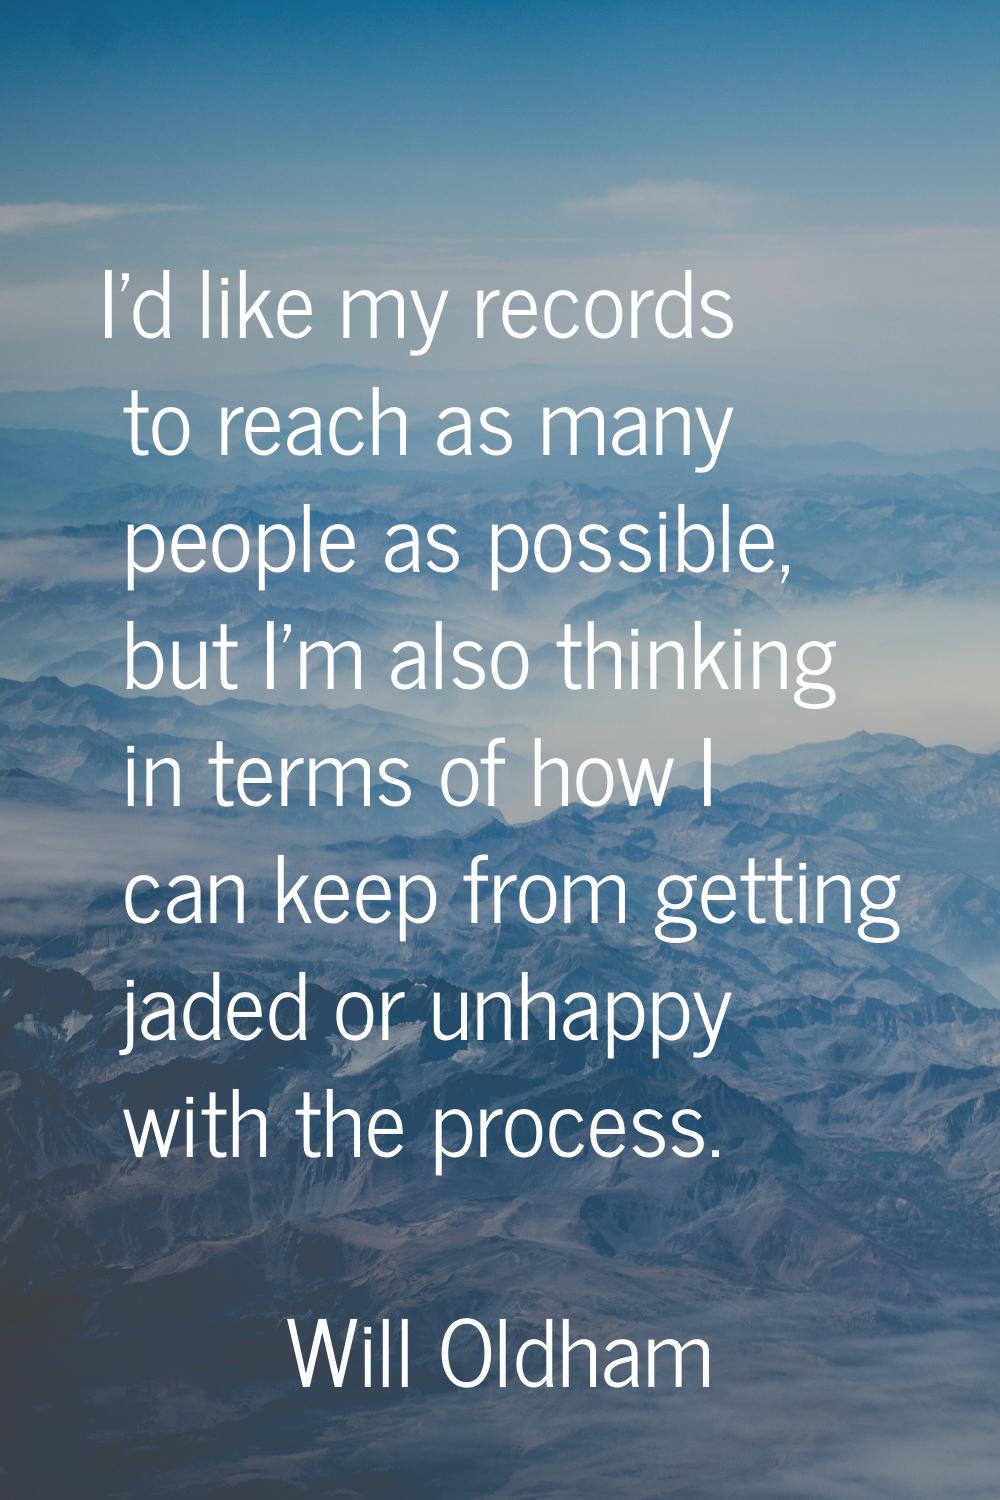 I'd like my records to reach as many people as possible, but I'm also thinking in terms of how I ca